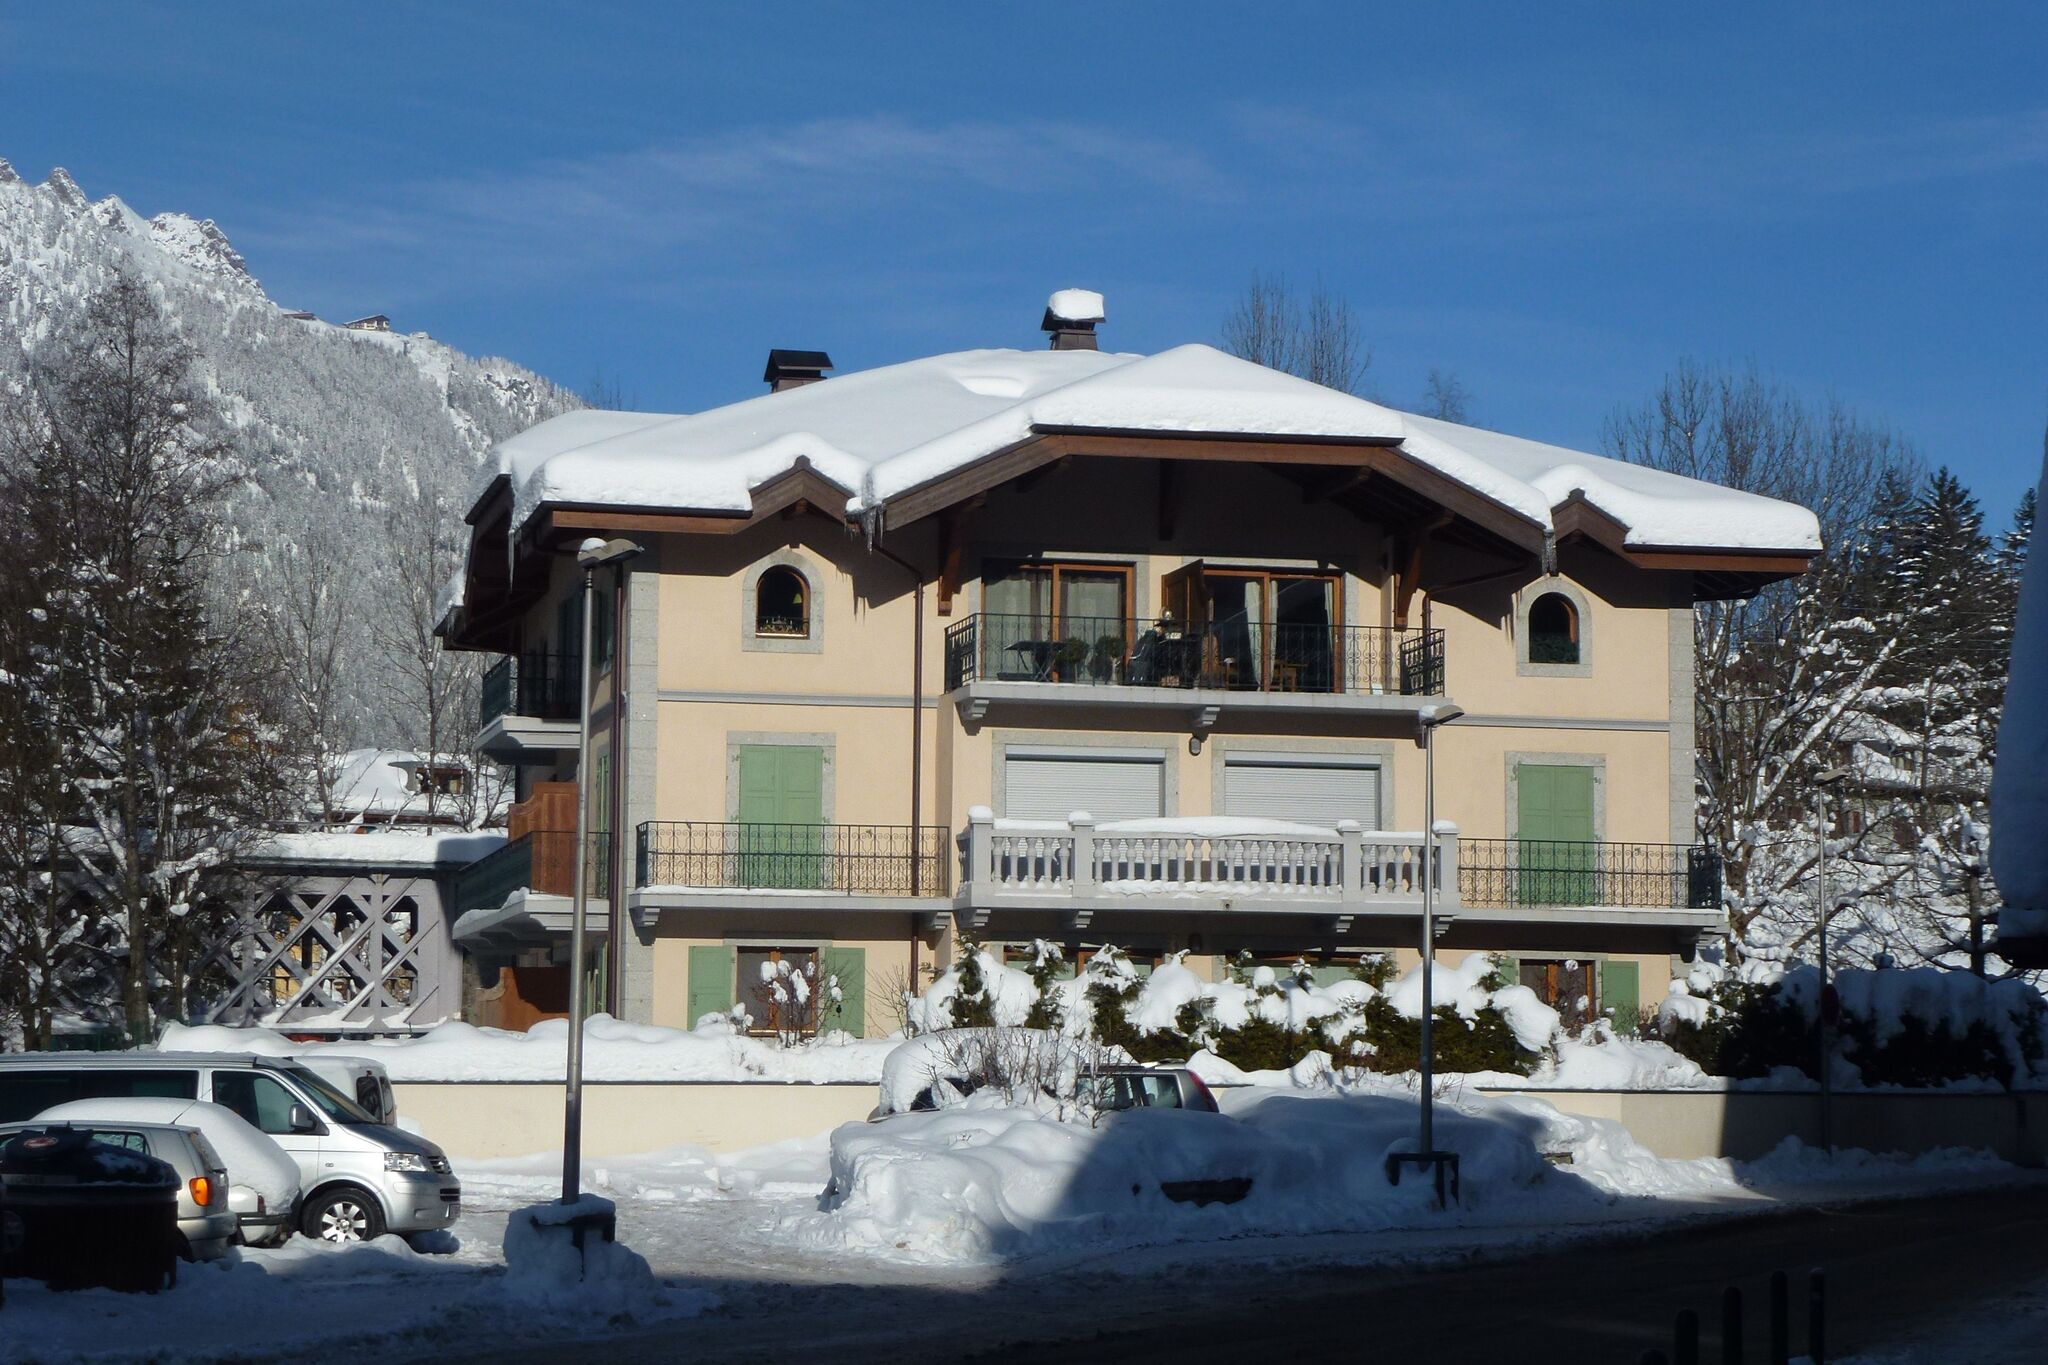 Very nice cozy and bright apartment near the center of Chamonix